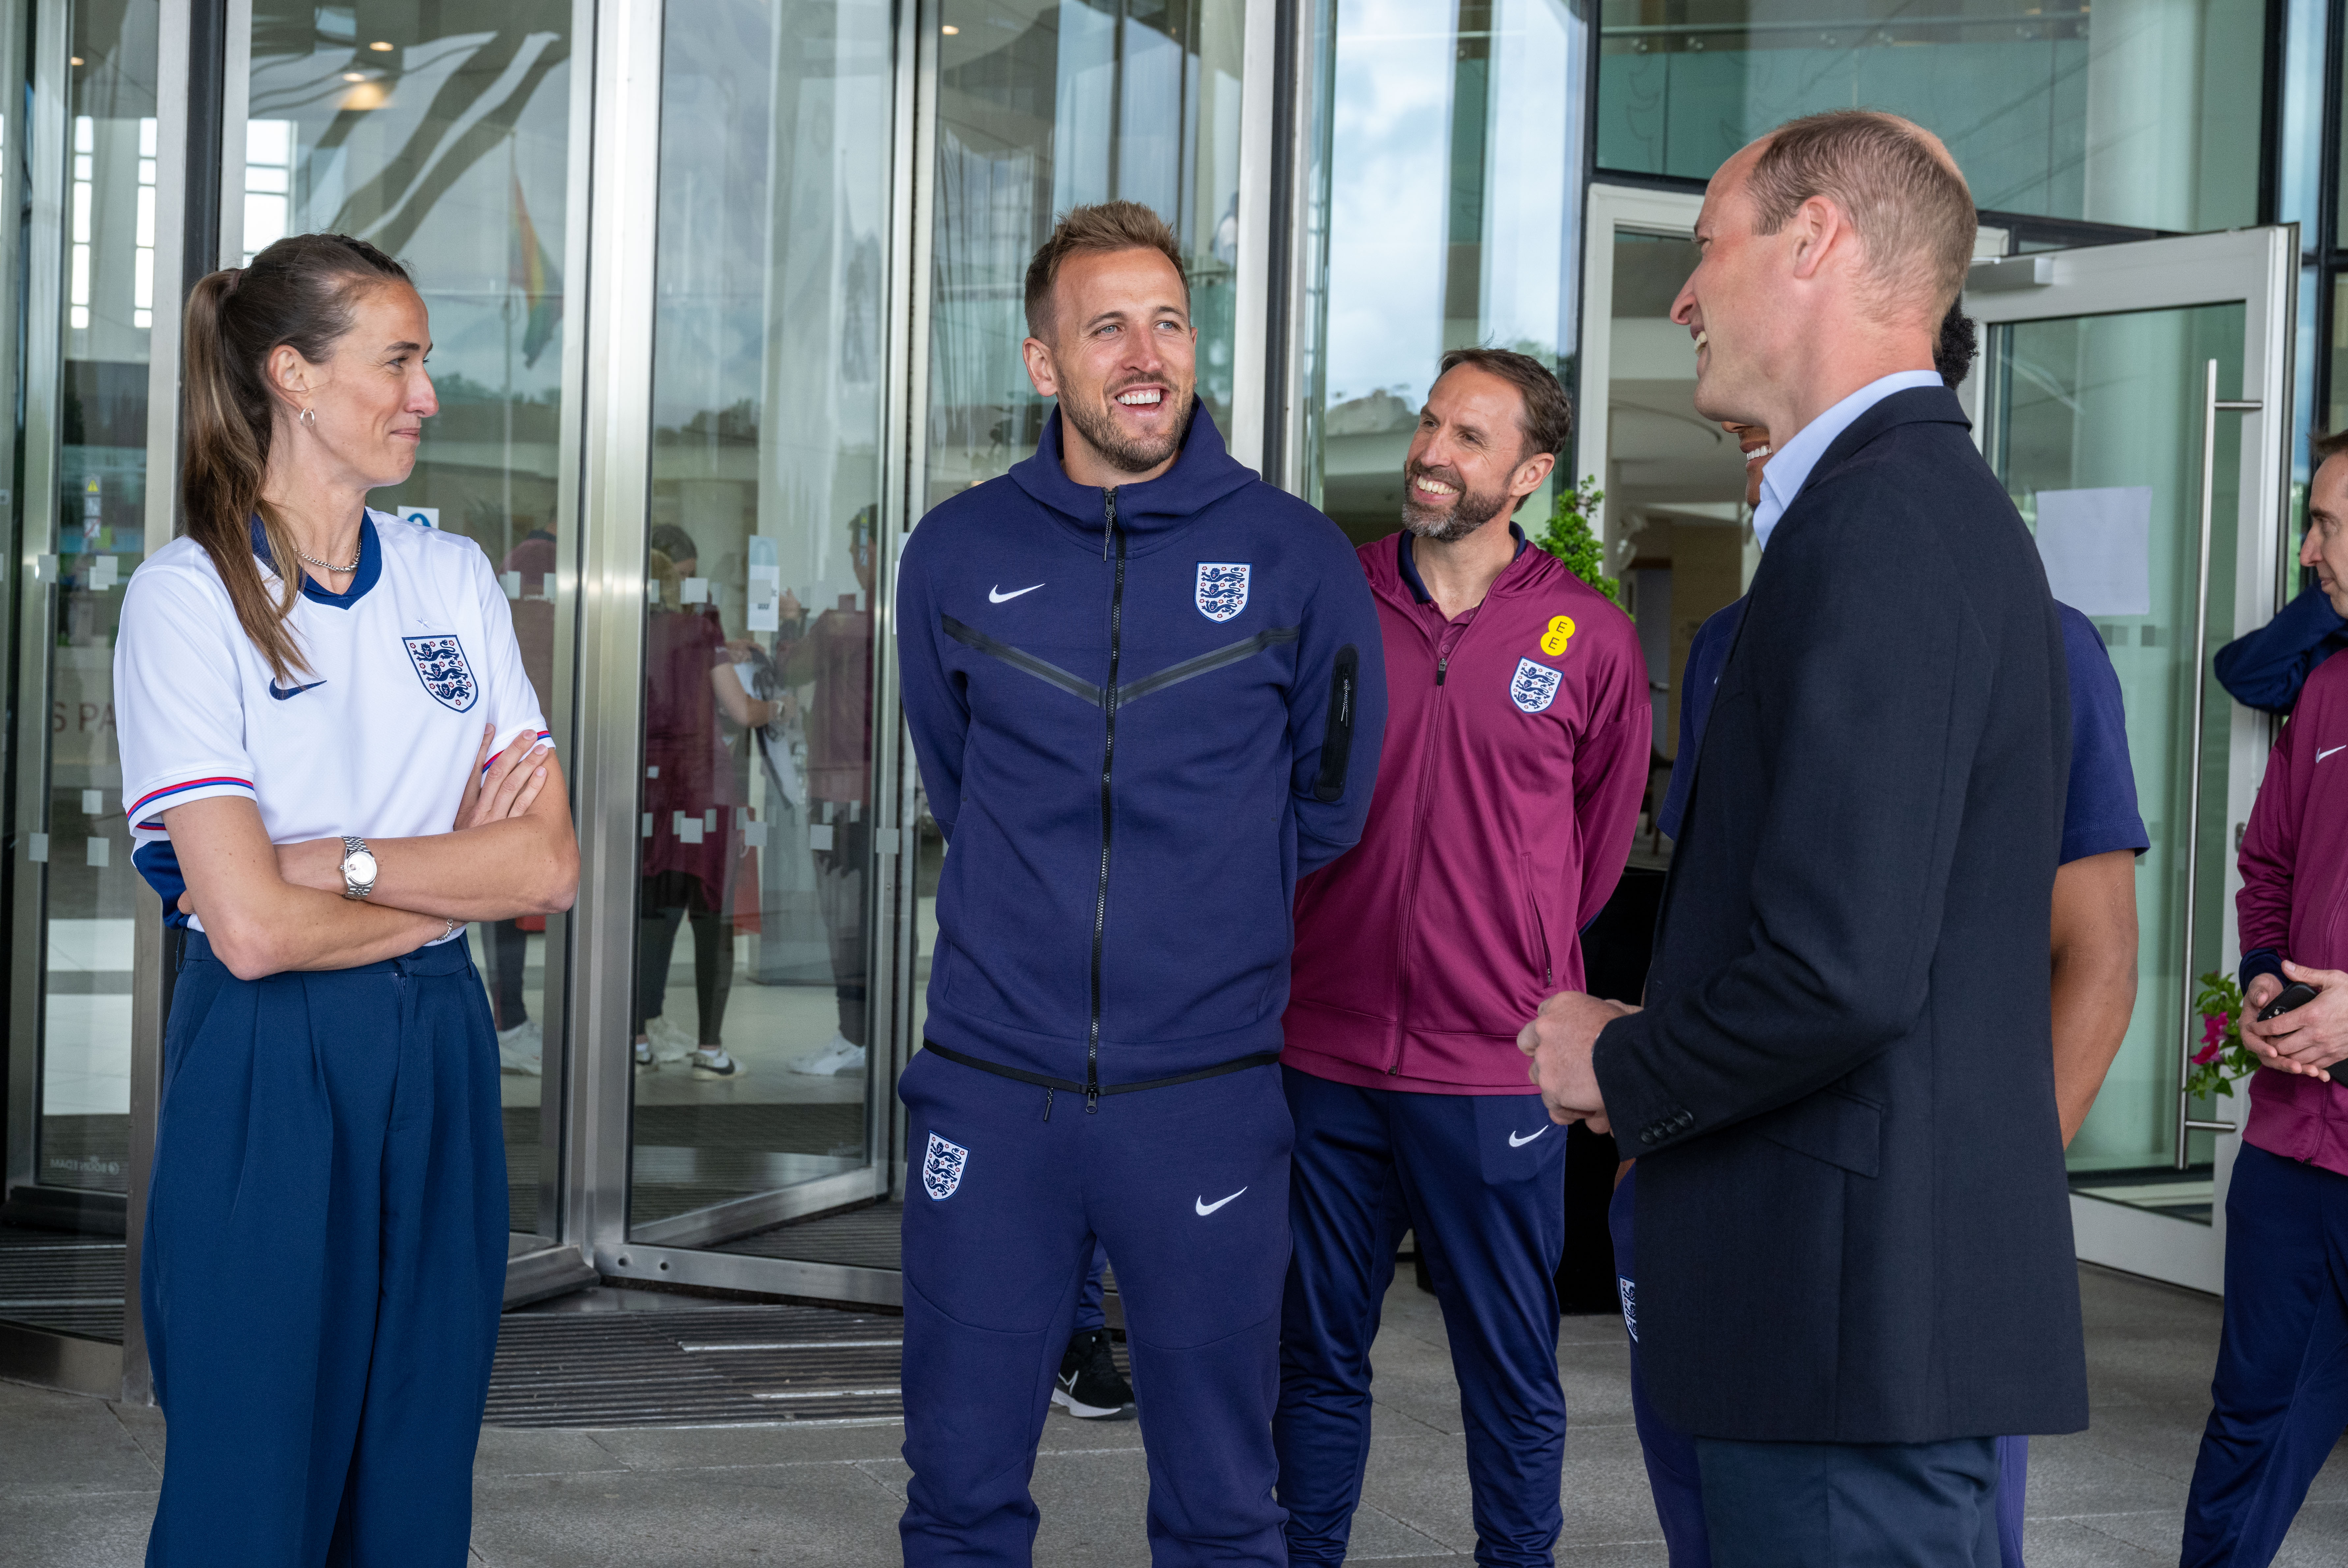 The Prince of Wales (right) talks to Jill Scott (left), Harry Kane (centre) and Gareth Southgate.